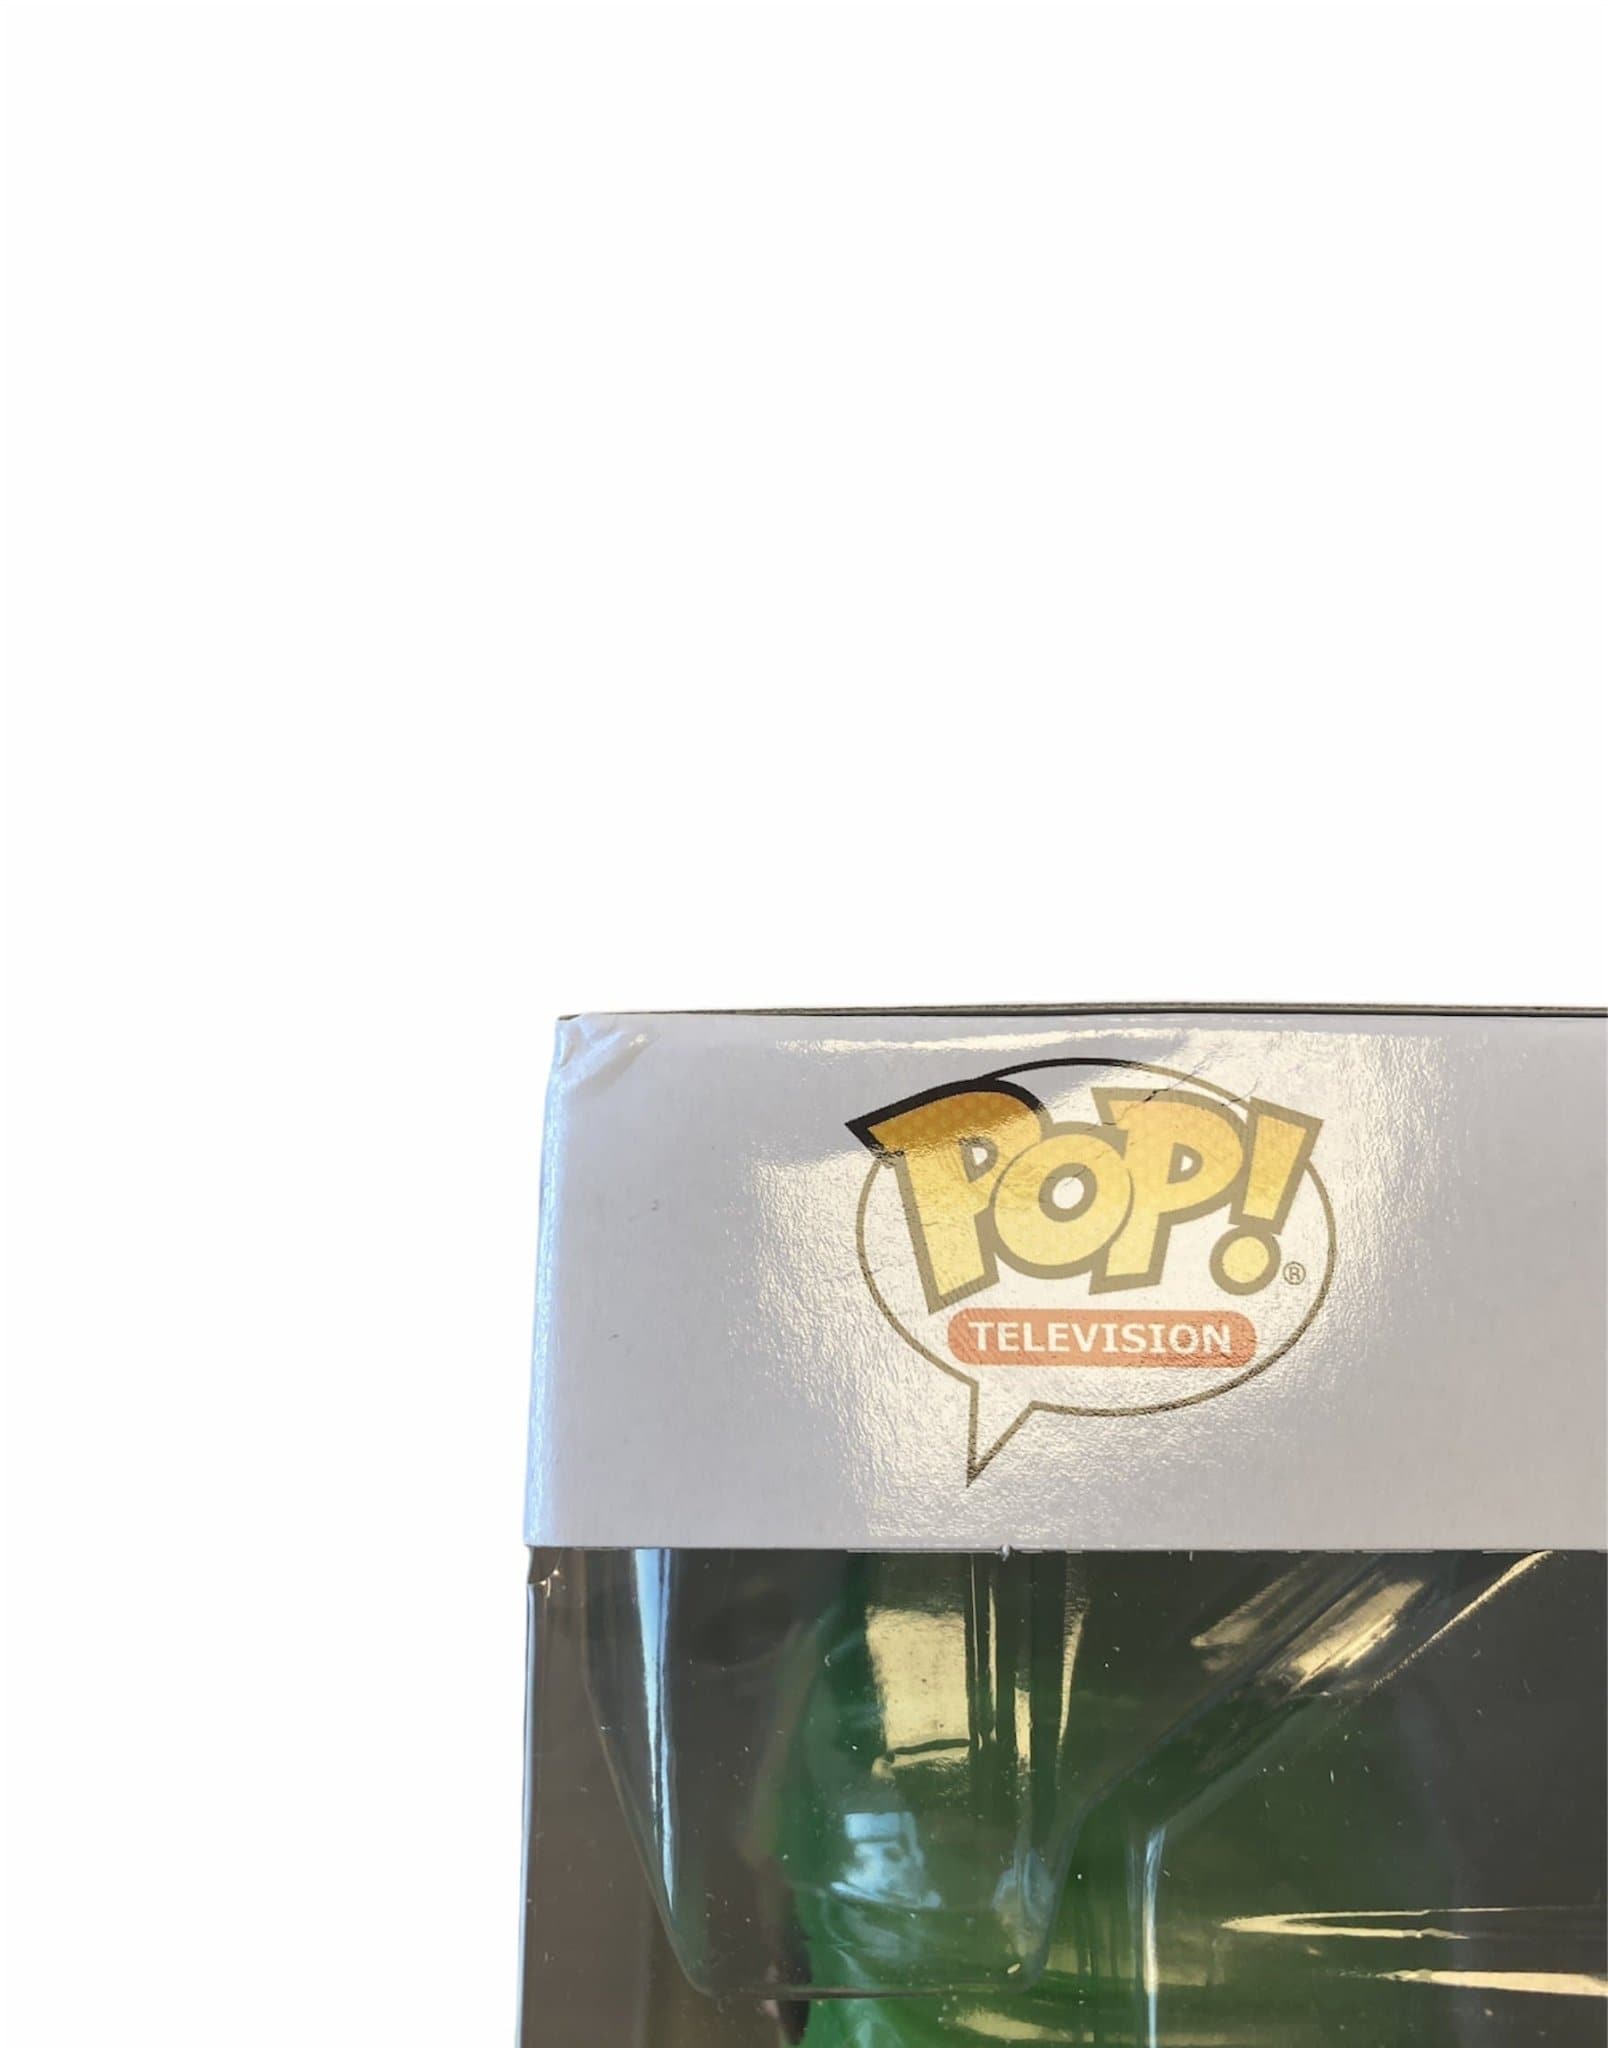 King Hiss #1038 Funko Pop! Masters Of The Universe. NYCC 2020 Exclusive. Condition 8/10 - Pop Figures